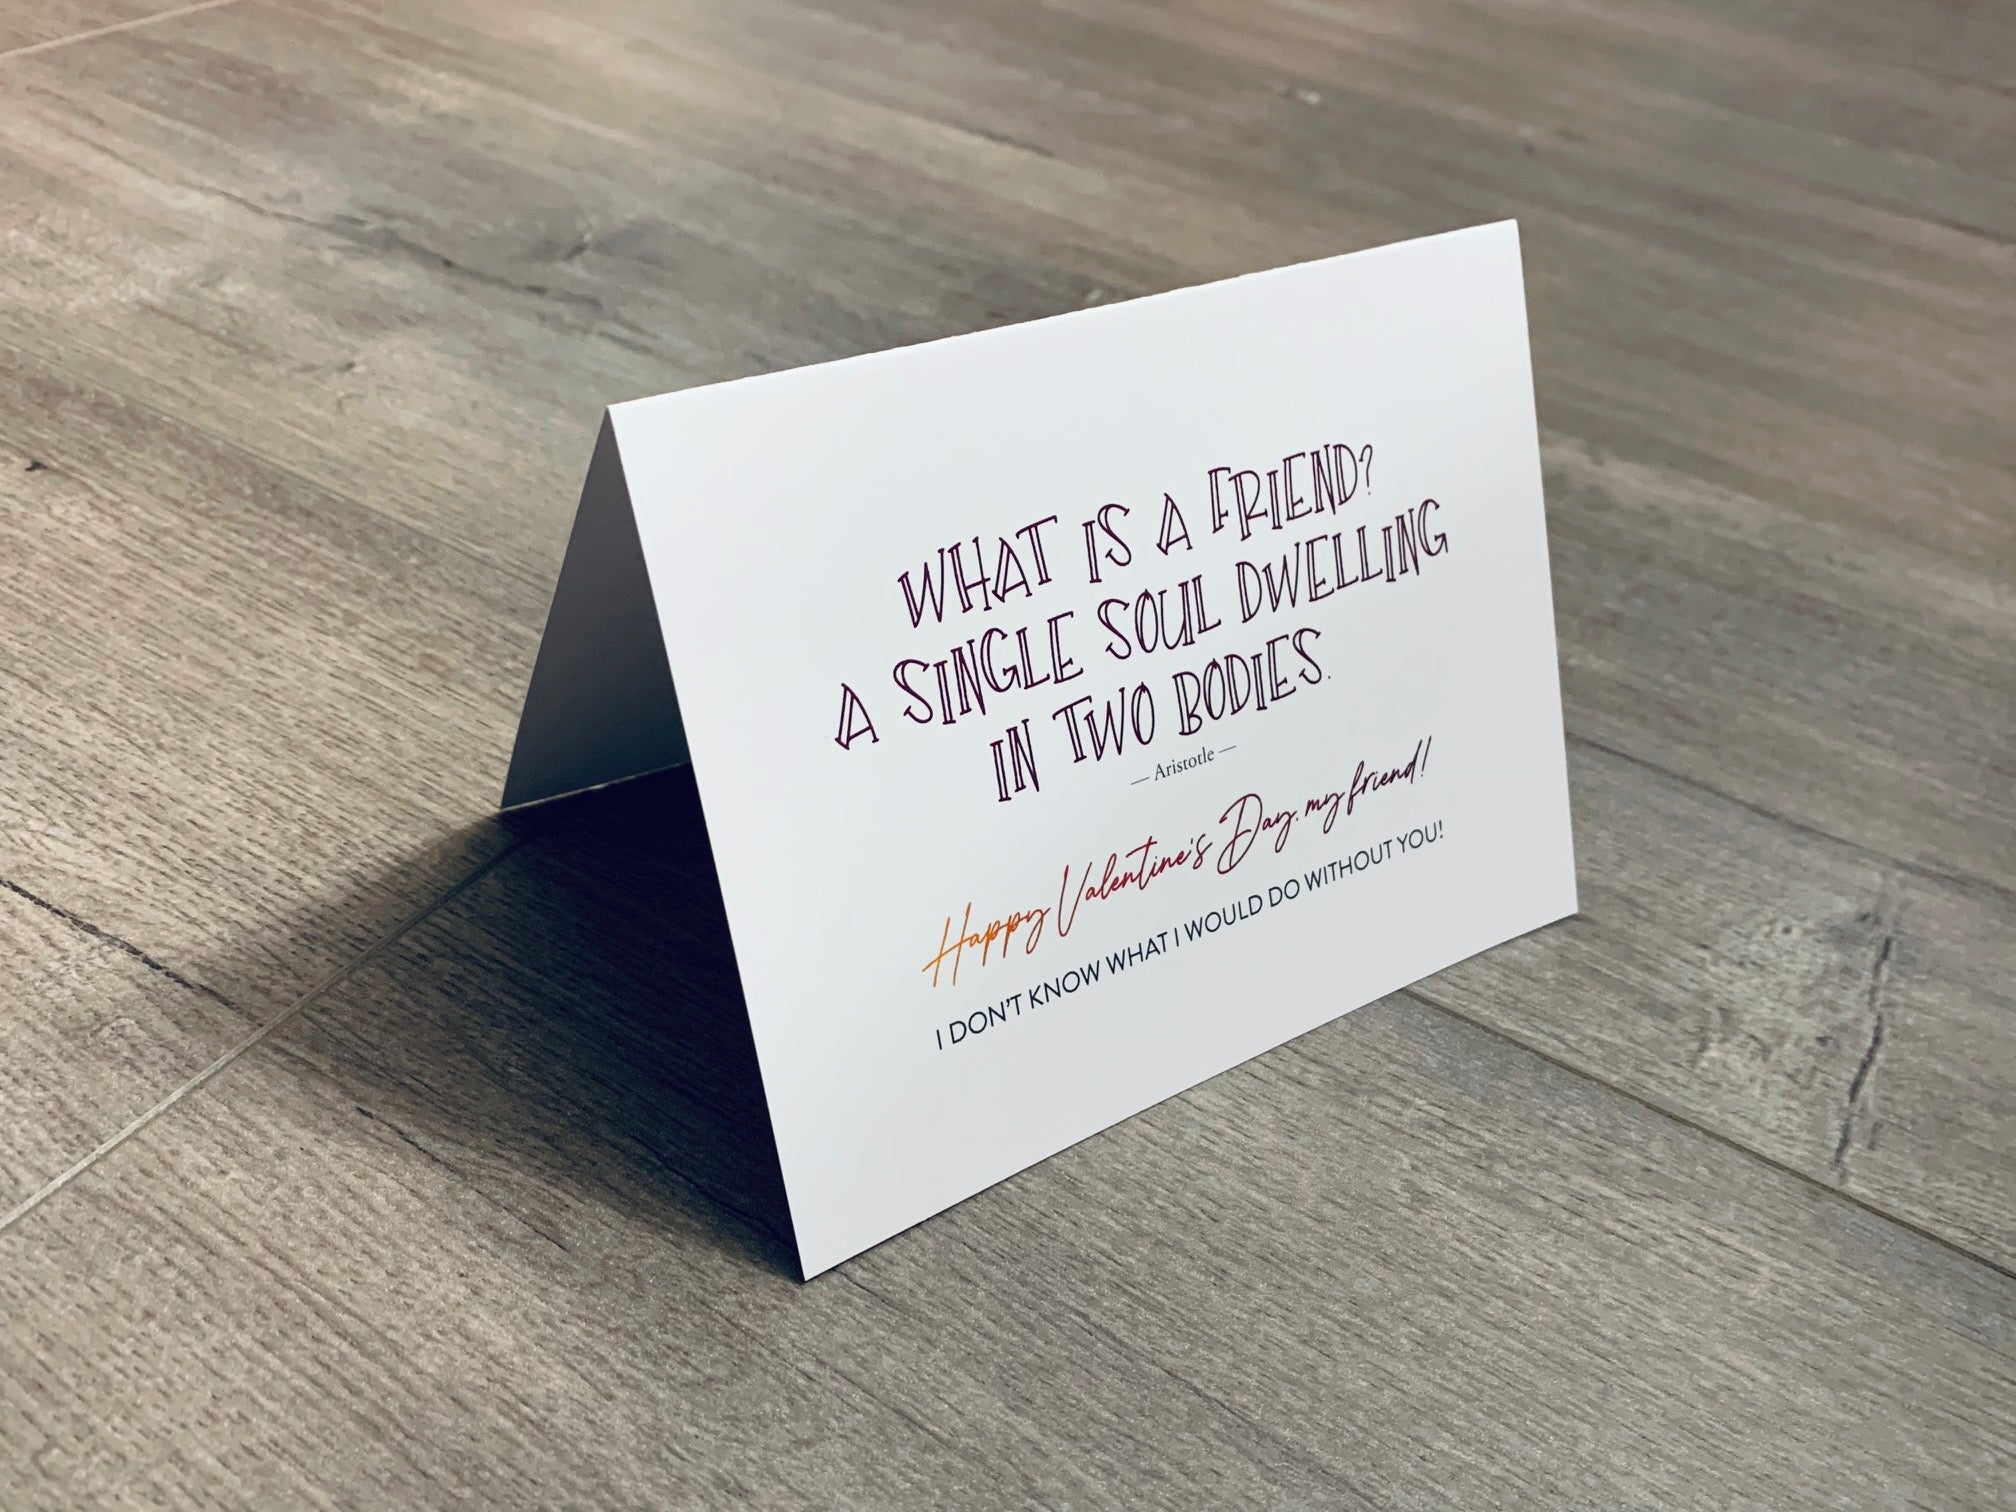 A white, folded notecard sits on a wooden floor. The card has a quote by Aristotle and says, "What is a friend? A single soul dwelling in two bodies." The Friendship Valentines collection by Stationare.